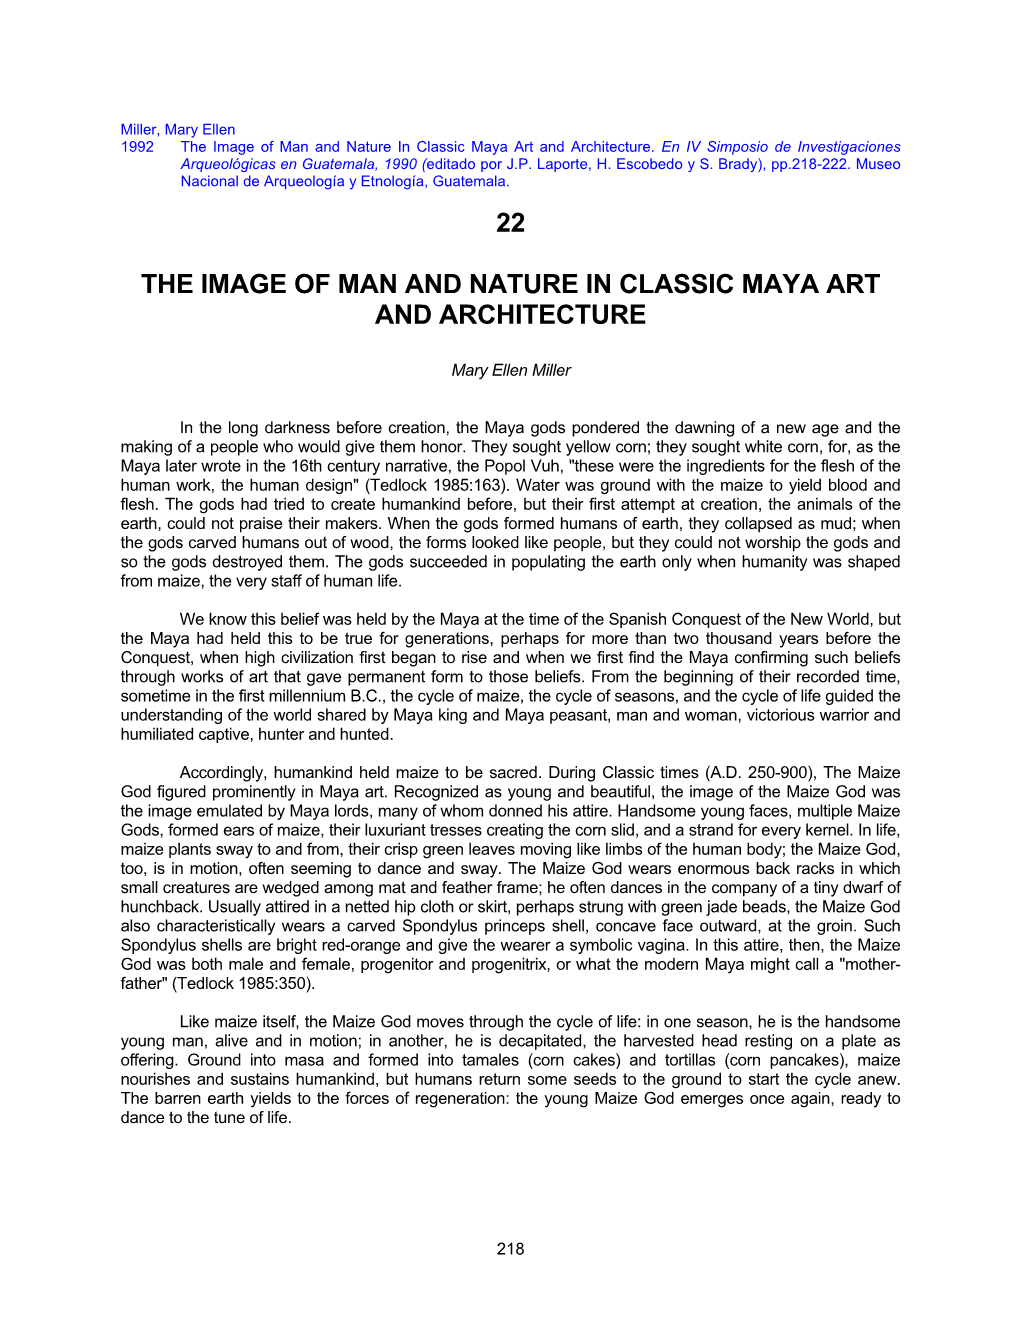 Miller, Mary Ellen 1992 the Image of Man and Nature in Classic Maya Art and Architecture